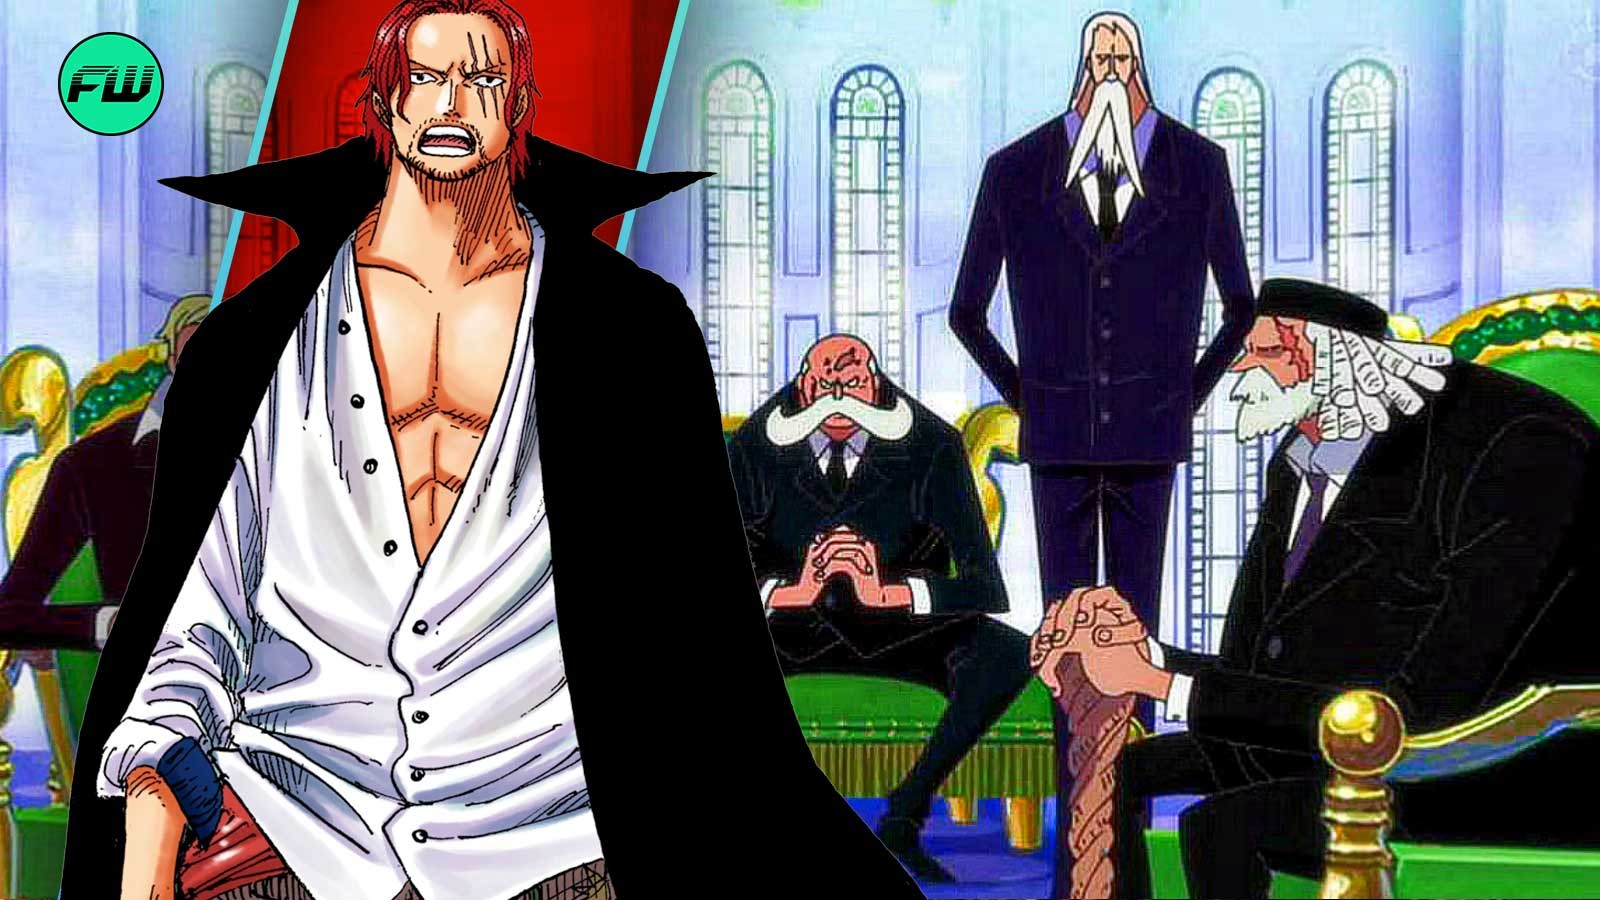 shanks, the world government